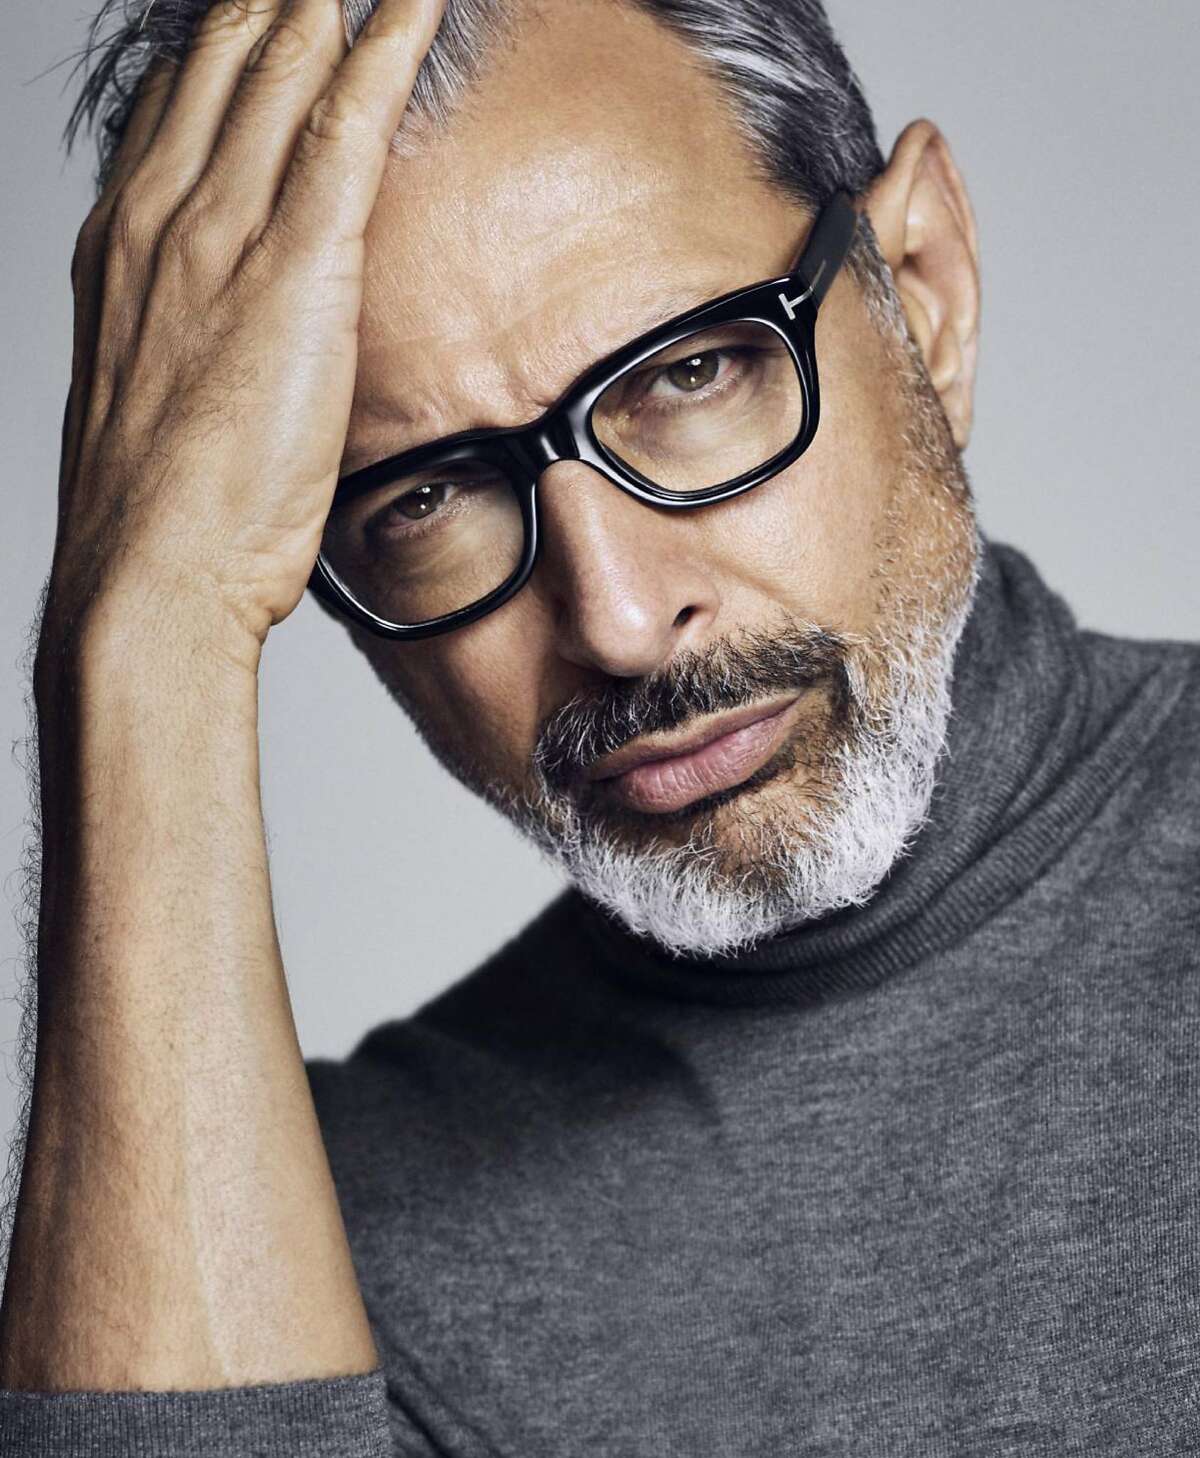 Jeff Goldblum will appear at Feinstein's at the Nikko on New Year's Eve.